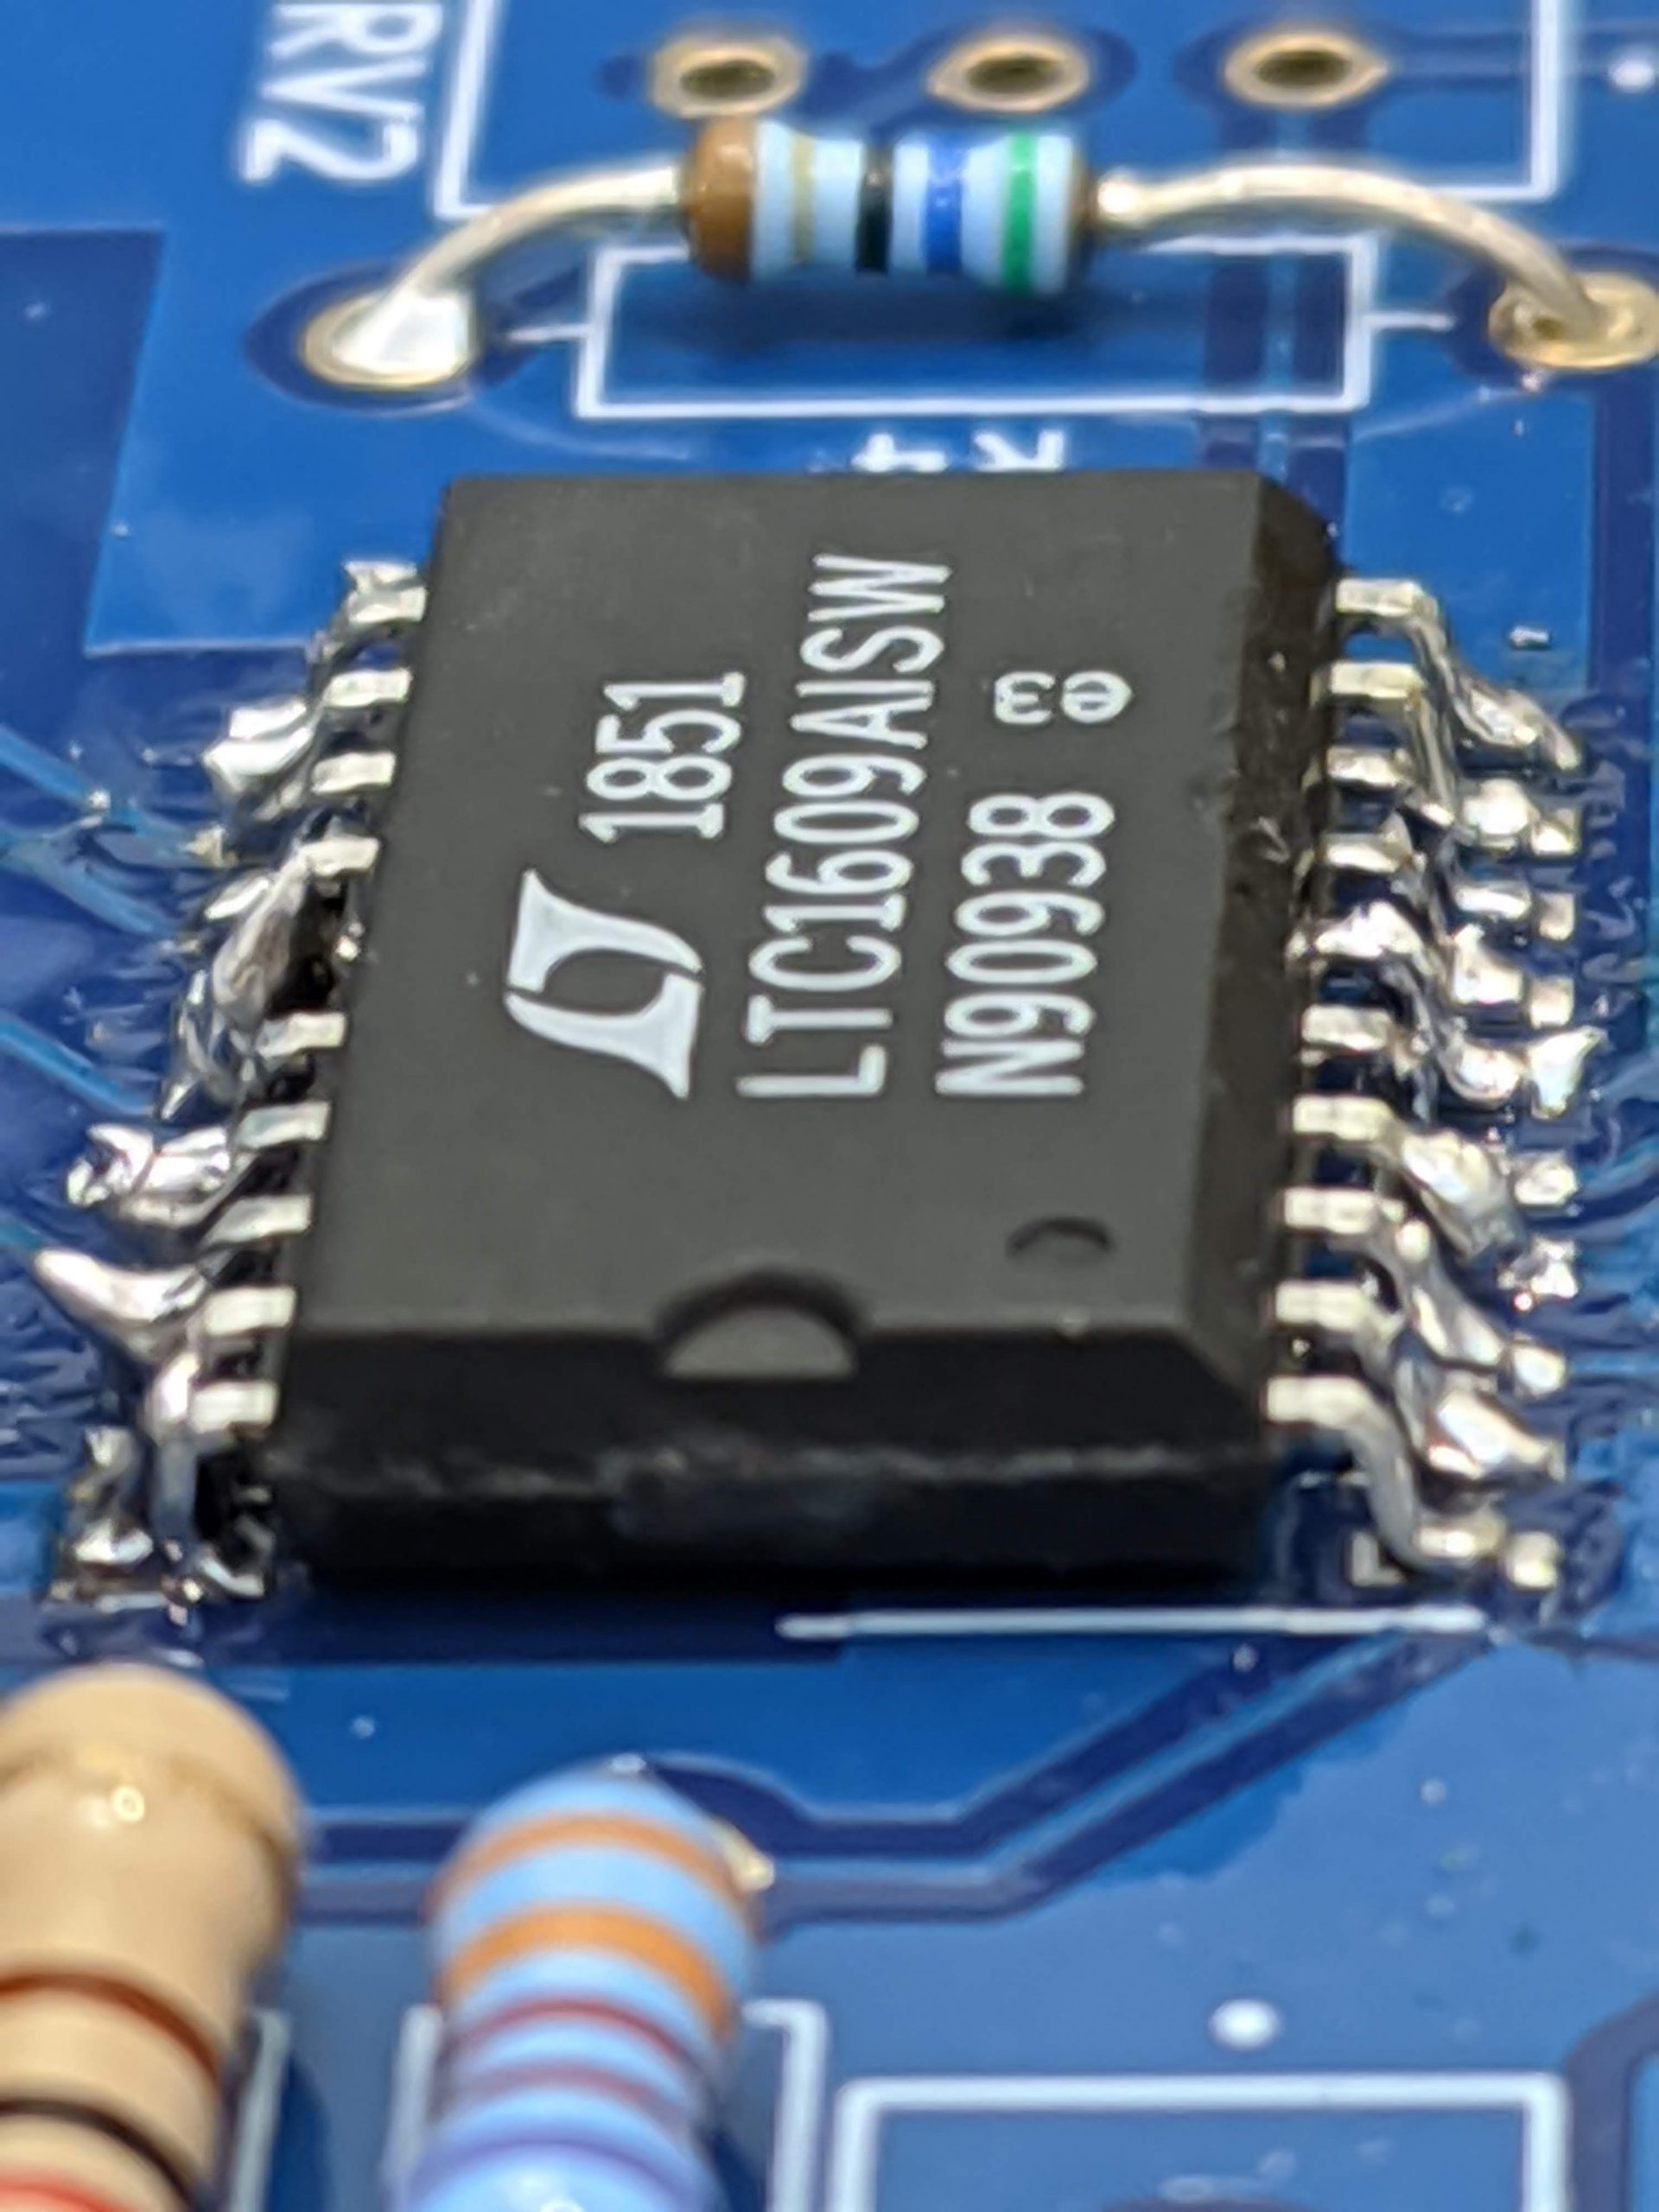 Interfacing with an LTC1609 ADC